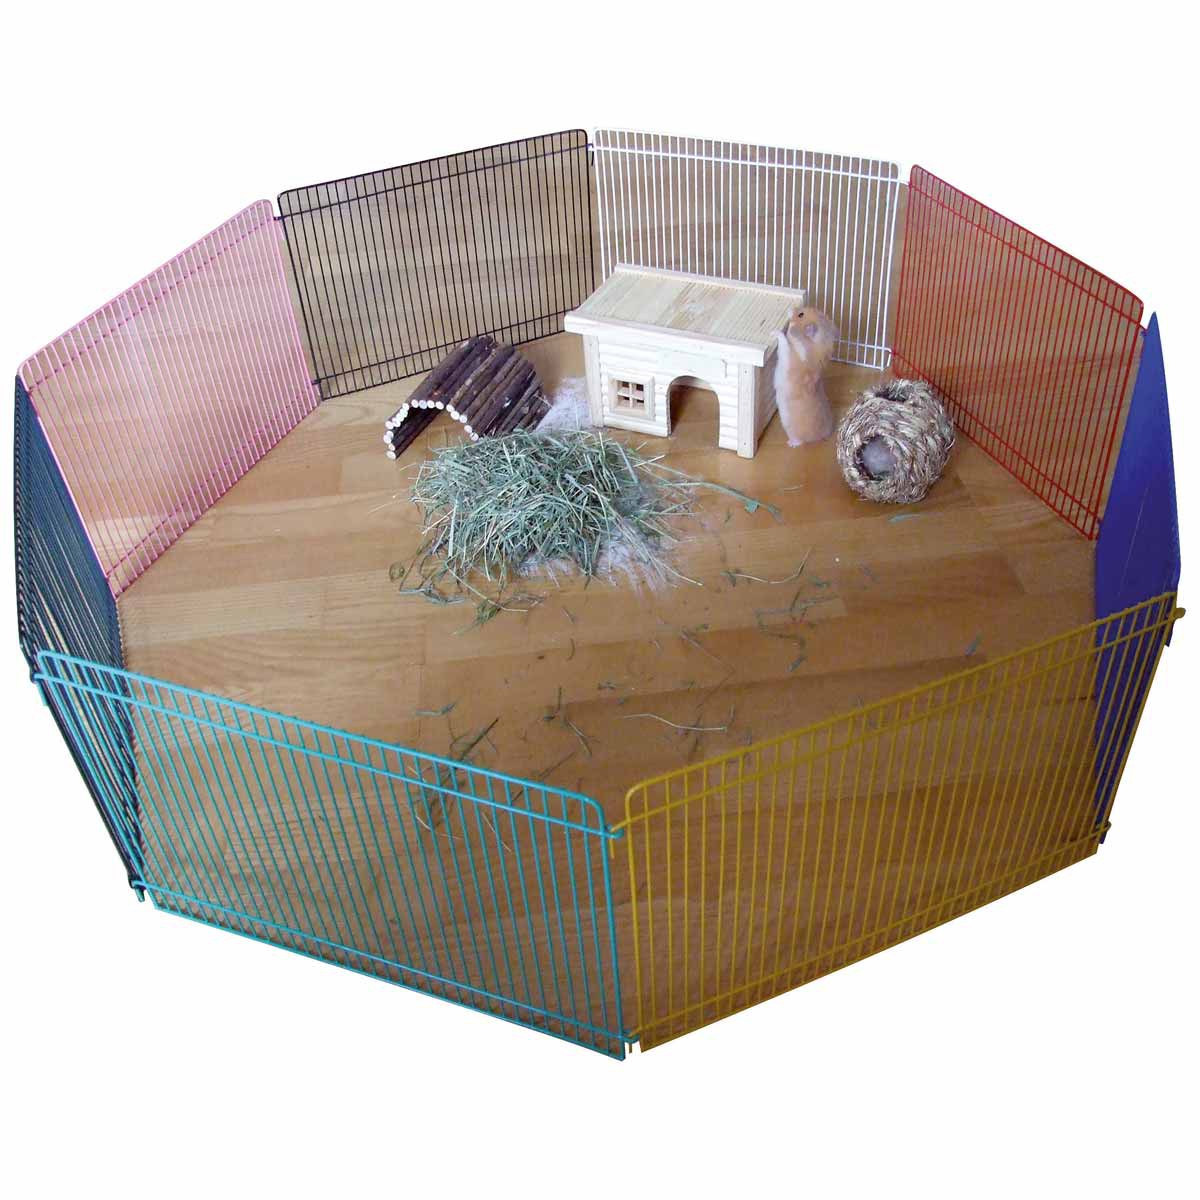 Containment Pen for hamster 8x á 34x23cm